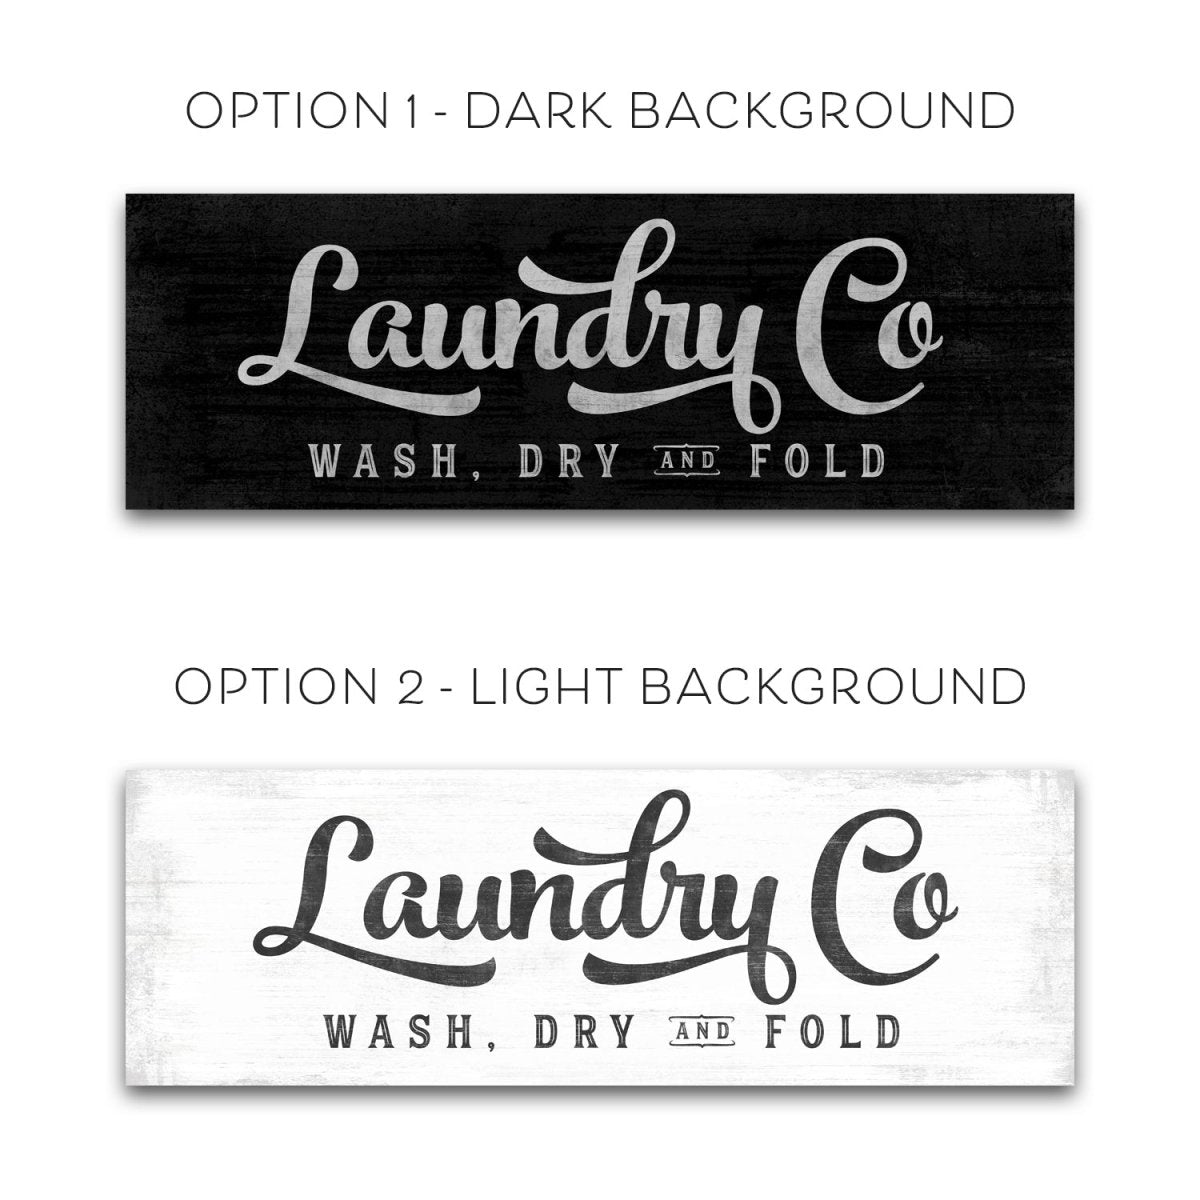 Laundry Co Sign - Wash, Dry, and Fold